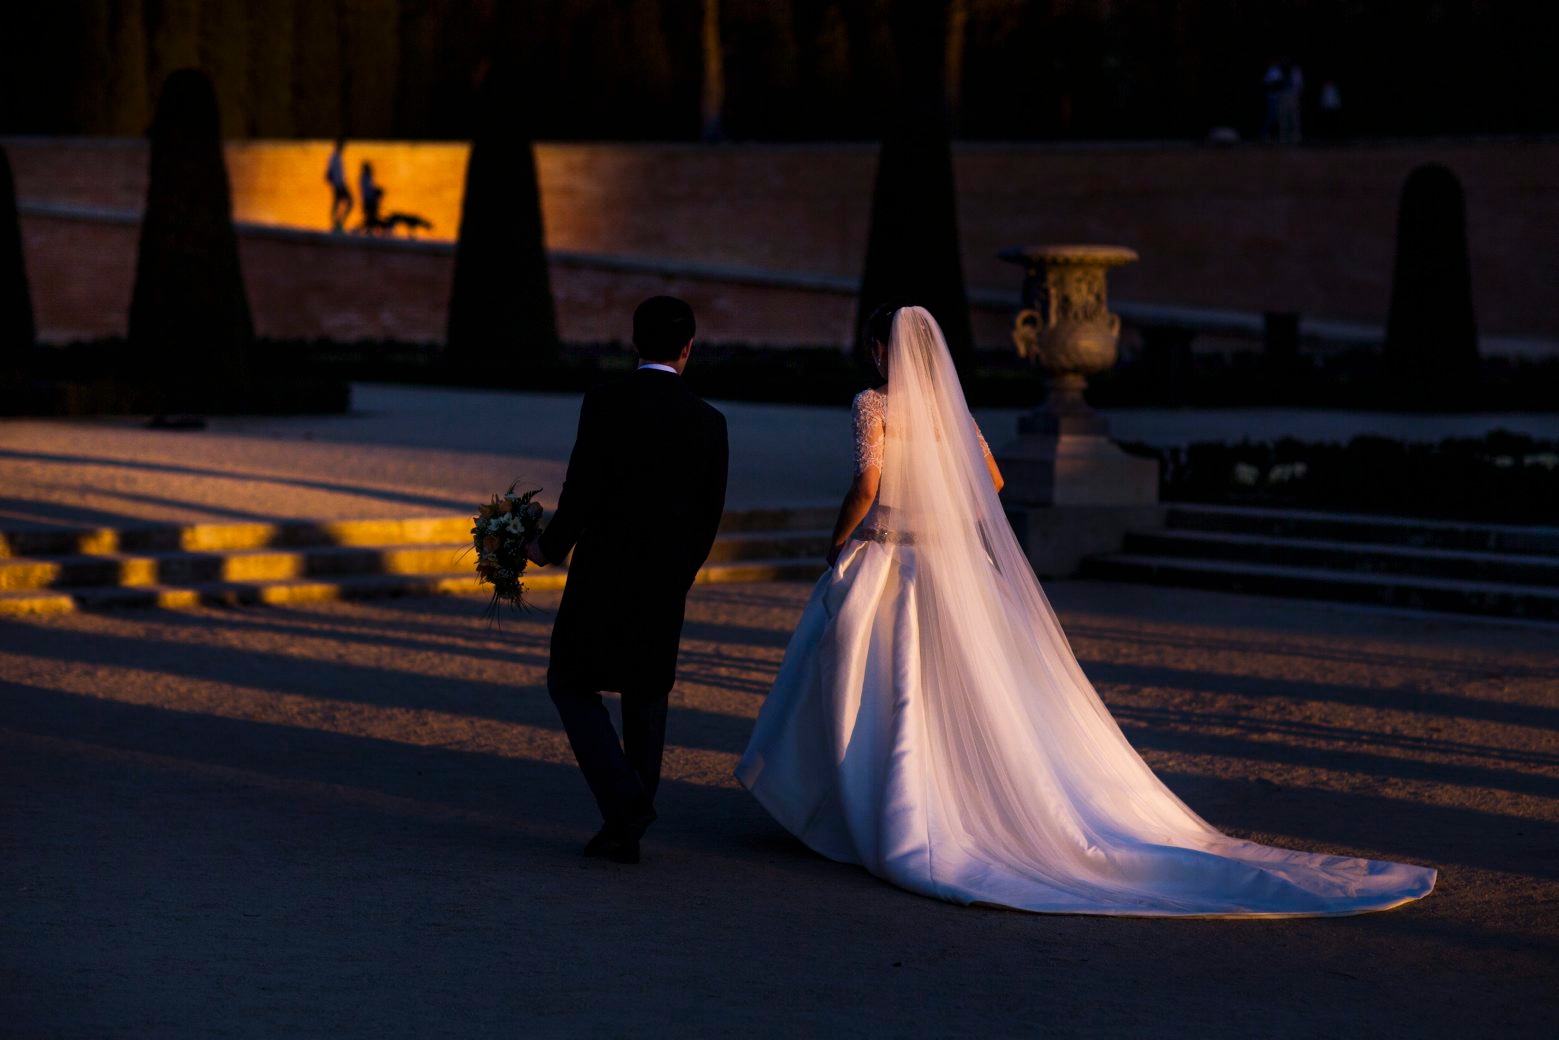 A married couple look for a location to take a wedding photo as people walk their dog during a sunset in Retiro Park in Madrid, Spain, Saturday, March 7, 2015. The Retiro Park, a beautifully tended 350-acre garden space where city-dwellers go to get away from the metropolitan hubbub lies in the heart of the city. Originally the formal gardens of a medieval palace, it became King Philip II's 16th-century refuge from court preoccupations, as well as his religious retreat. (AP Photo/Andres Kudacki) APTOPIX Spain Daily Life